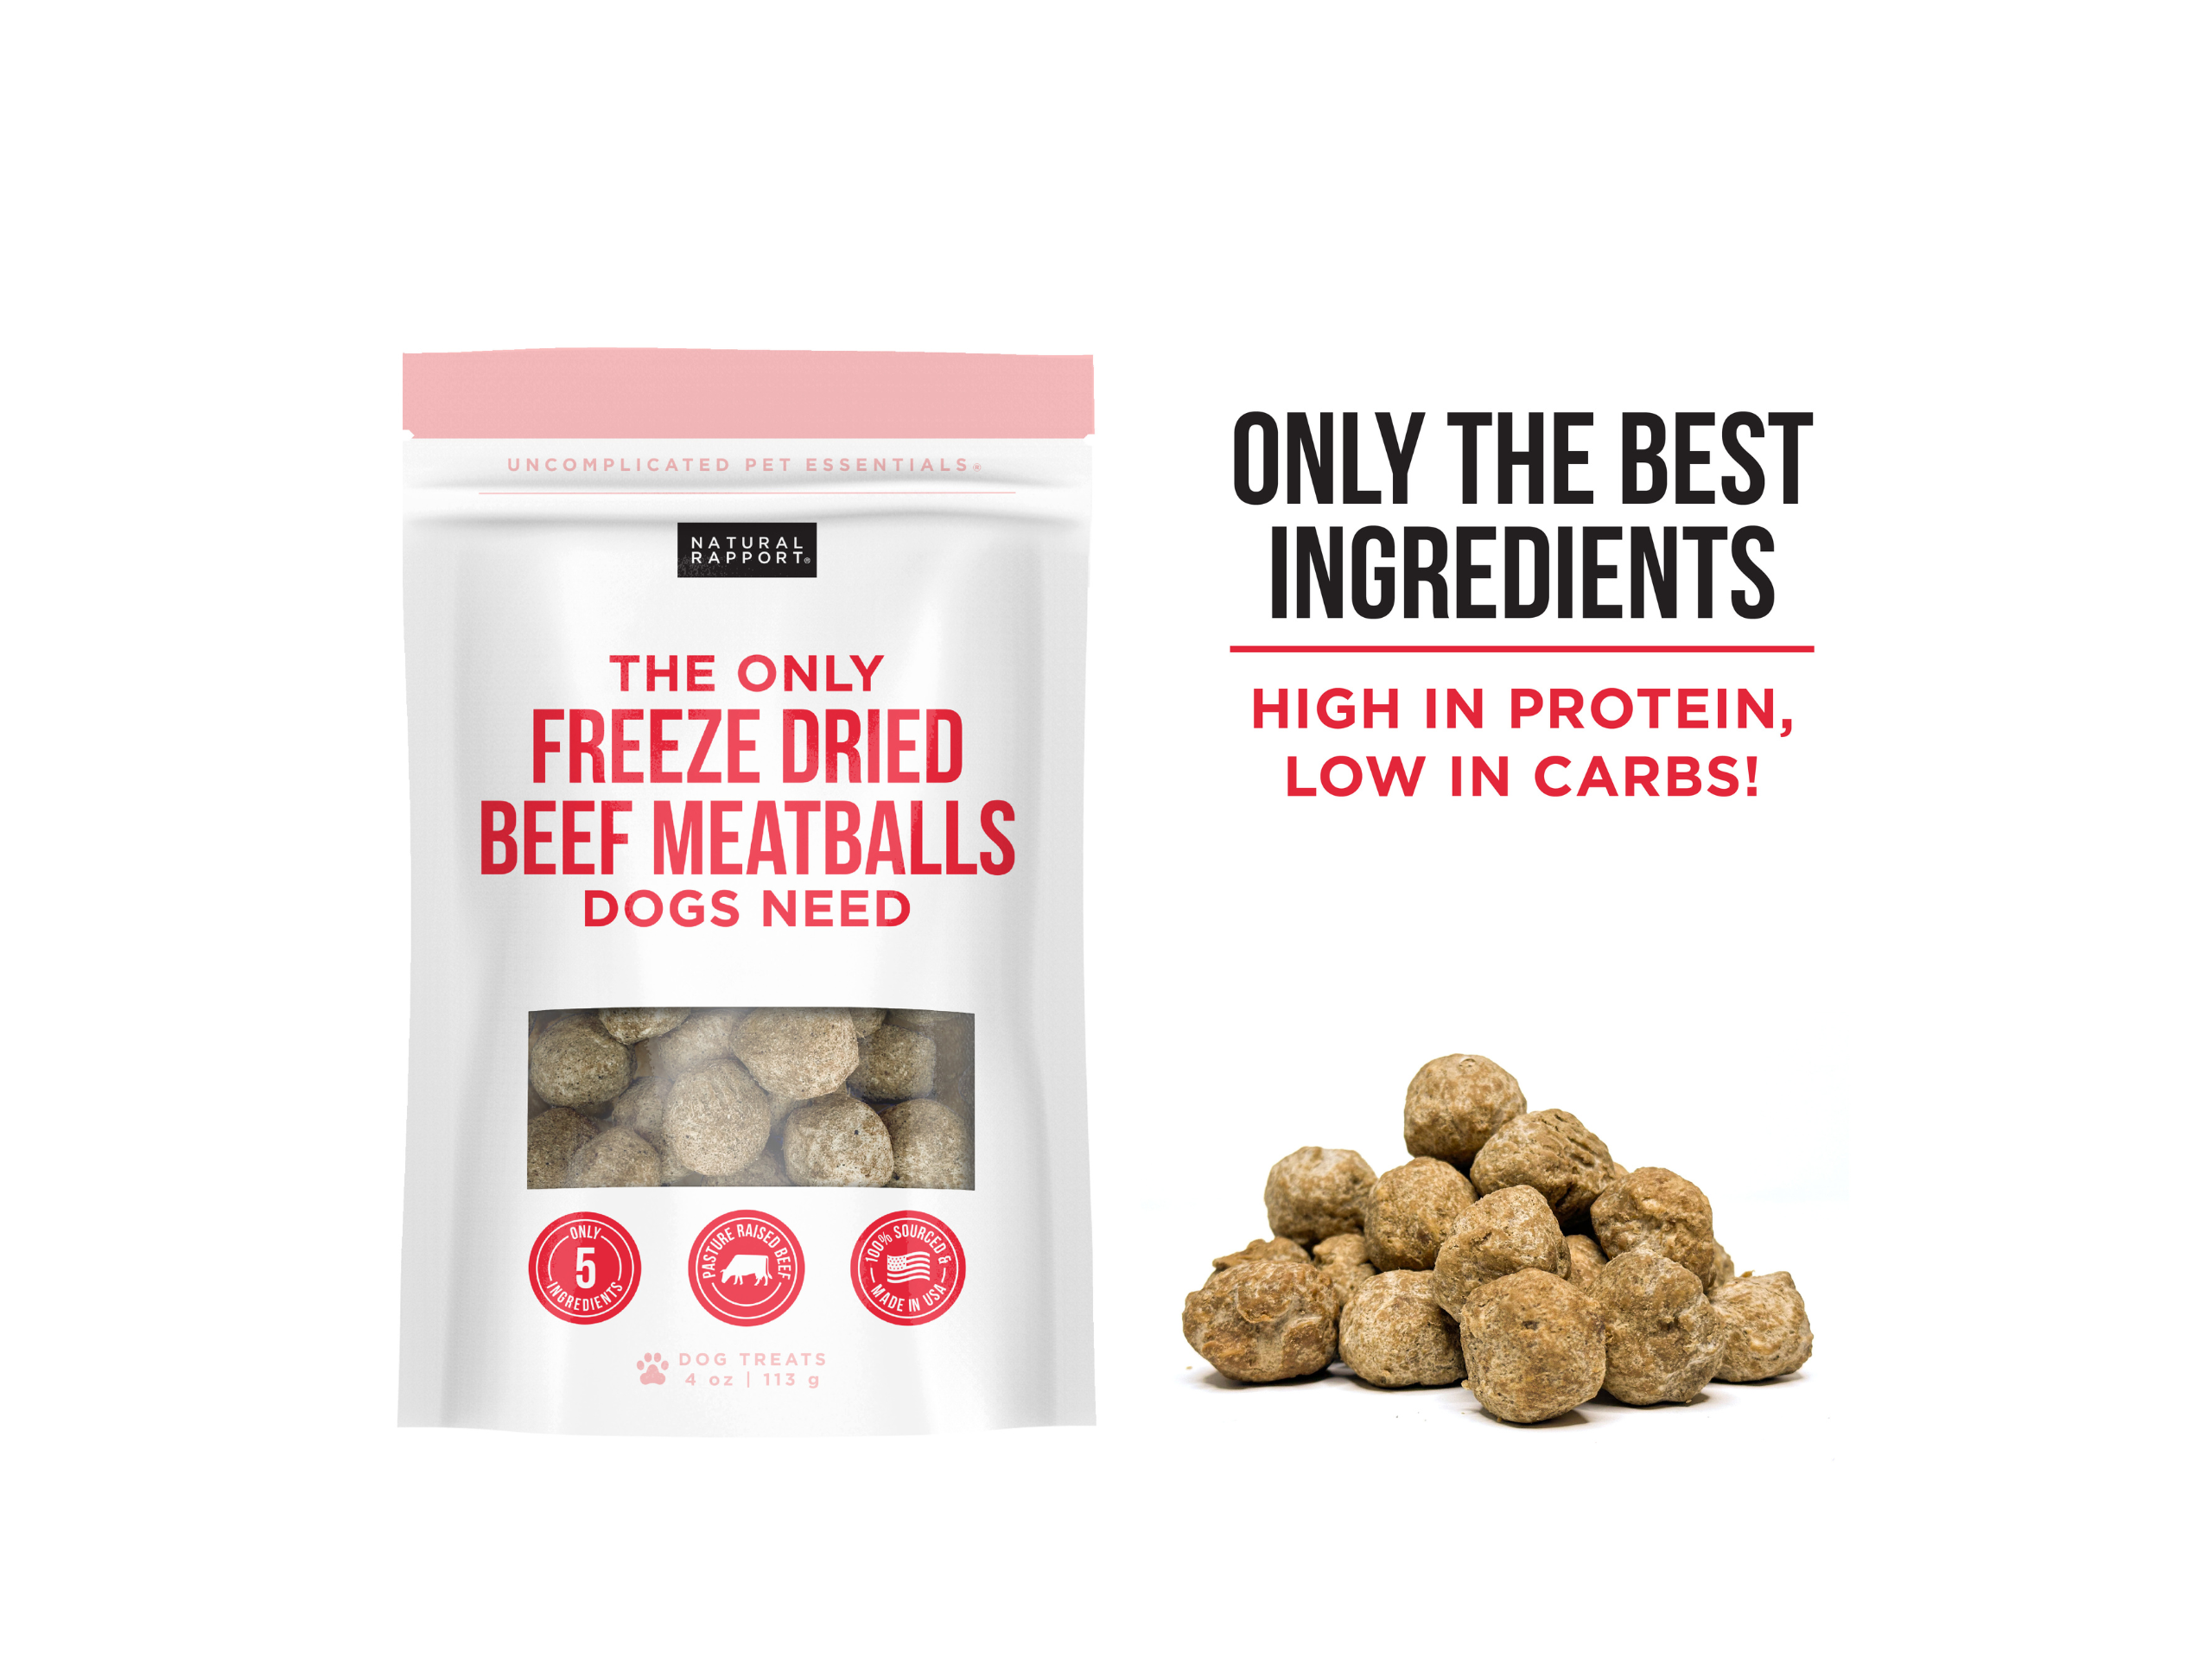 Natural Rapport - The Only Freeze Dried Beef Meatballs Dogs Need